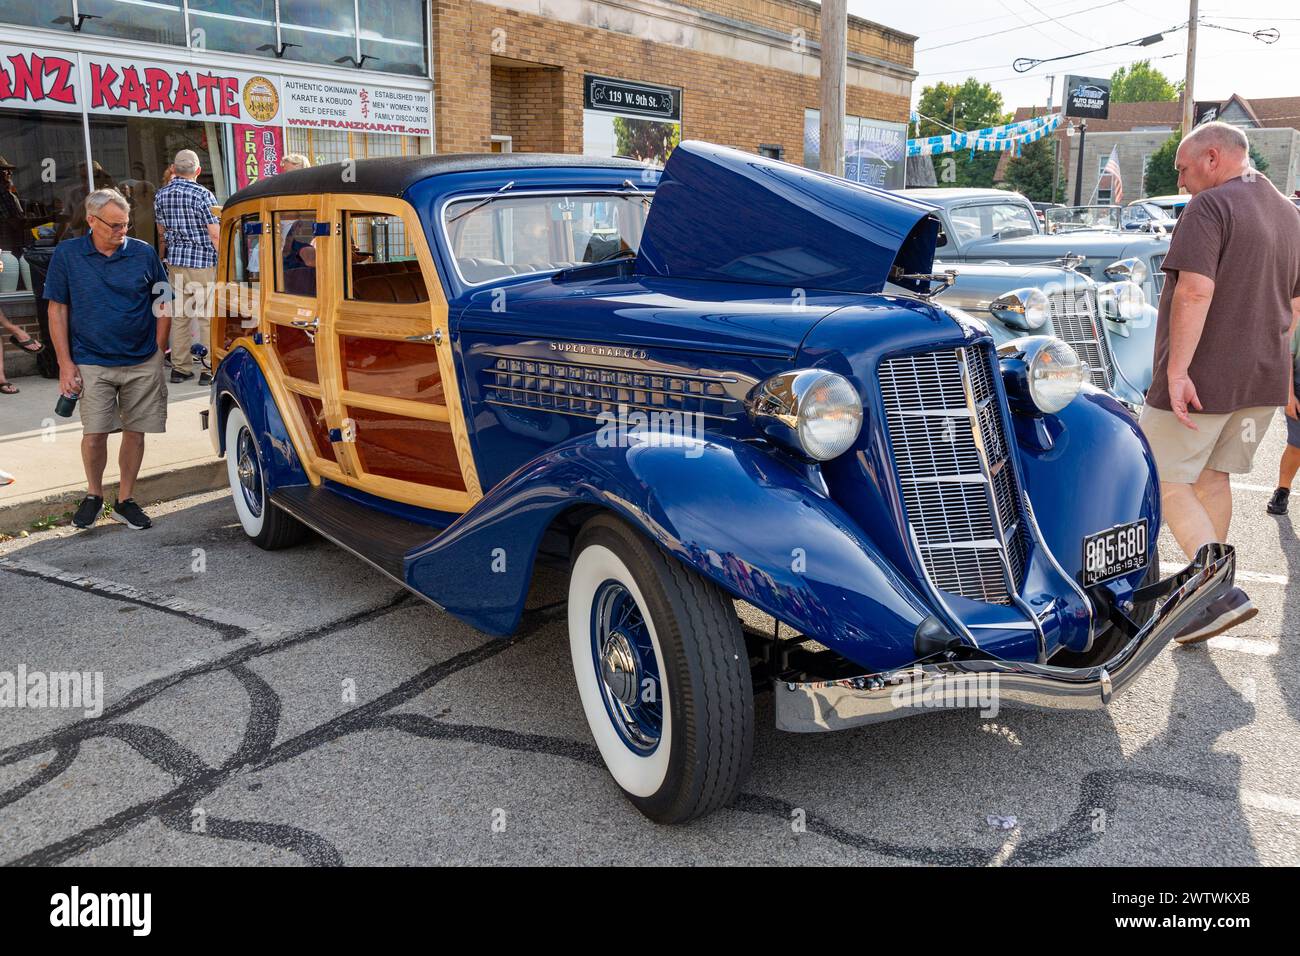 Two men admire a customized blue 1936 Auburn 852 Supercharged woody station wagon on display in Auburn, Indiana, USA. Stock Photo